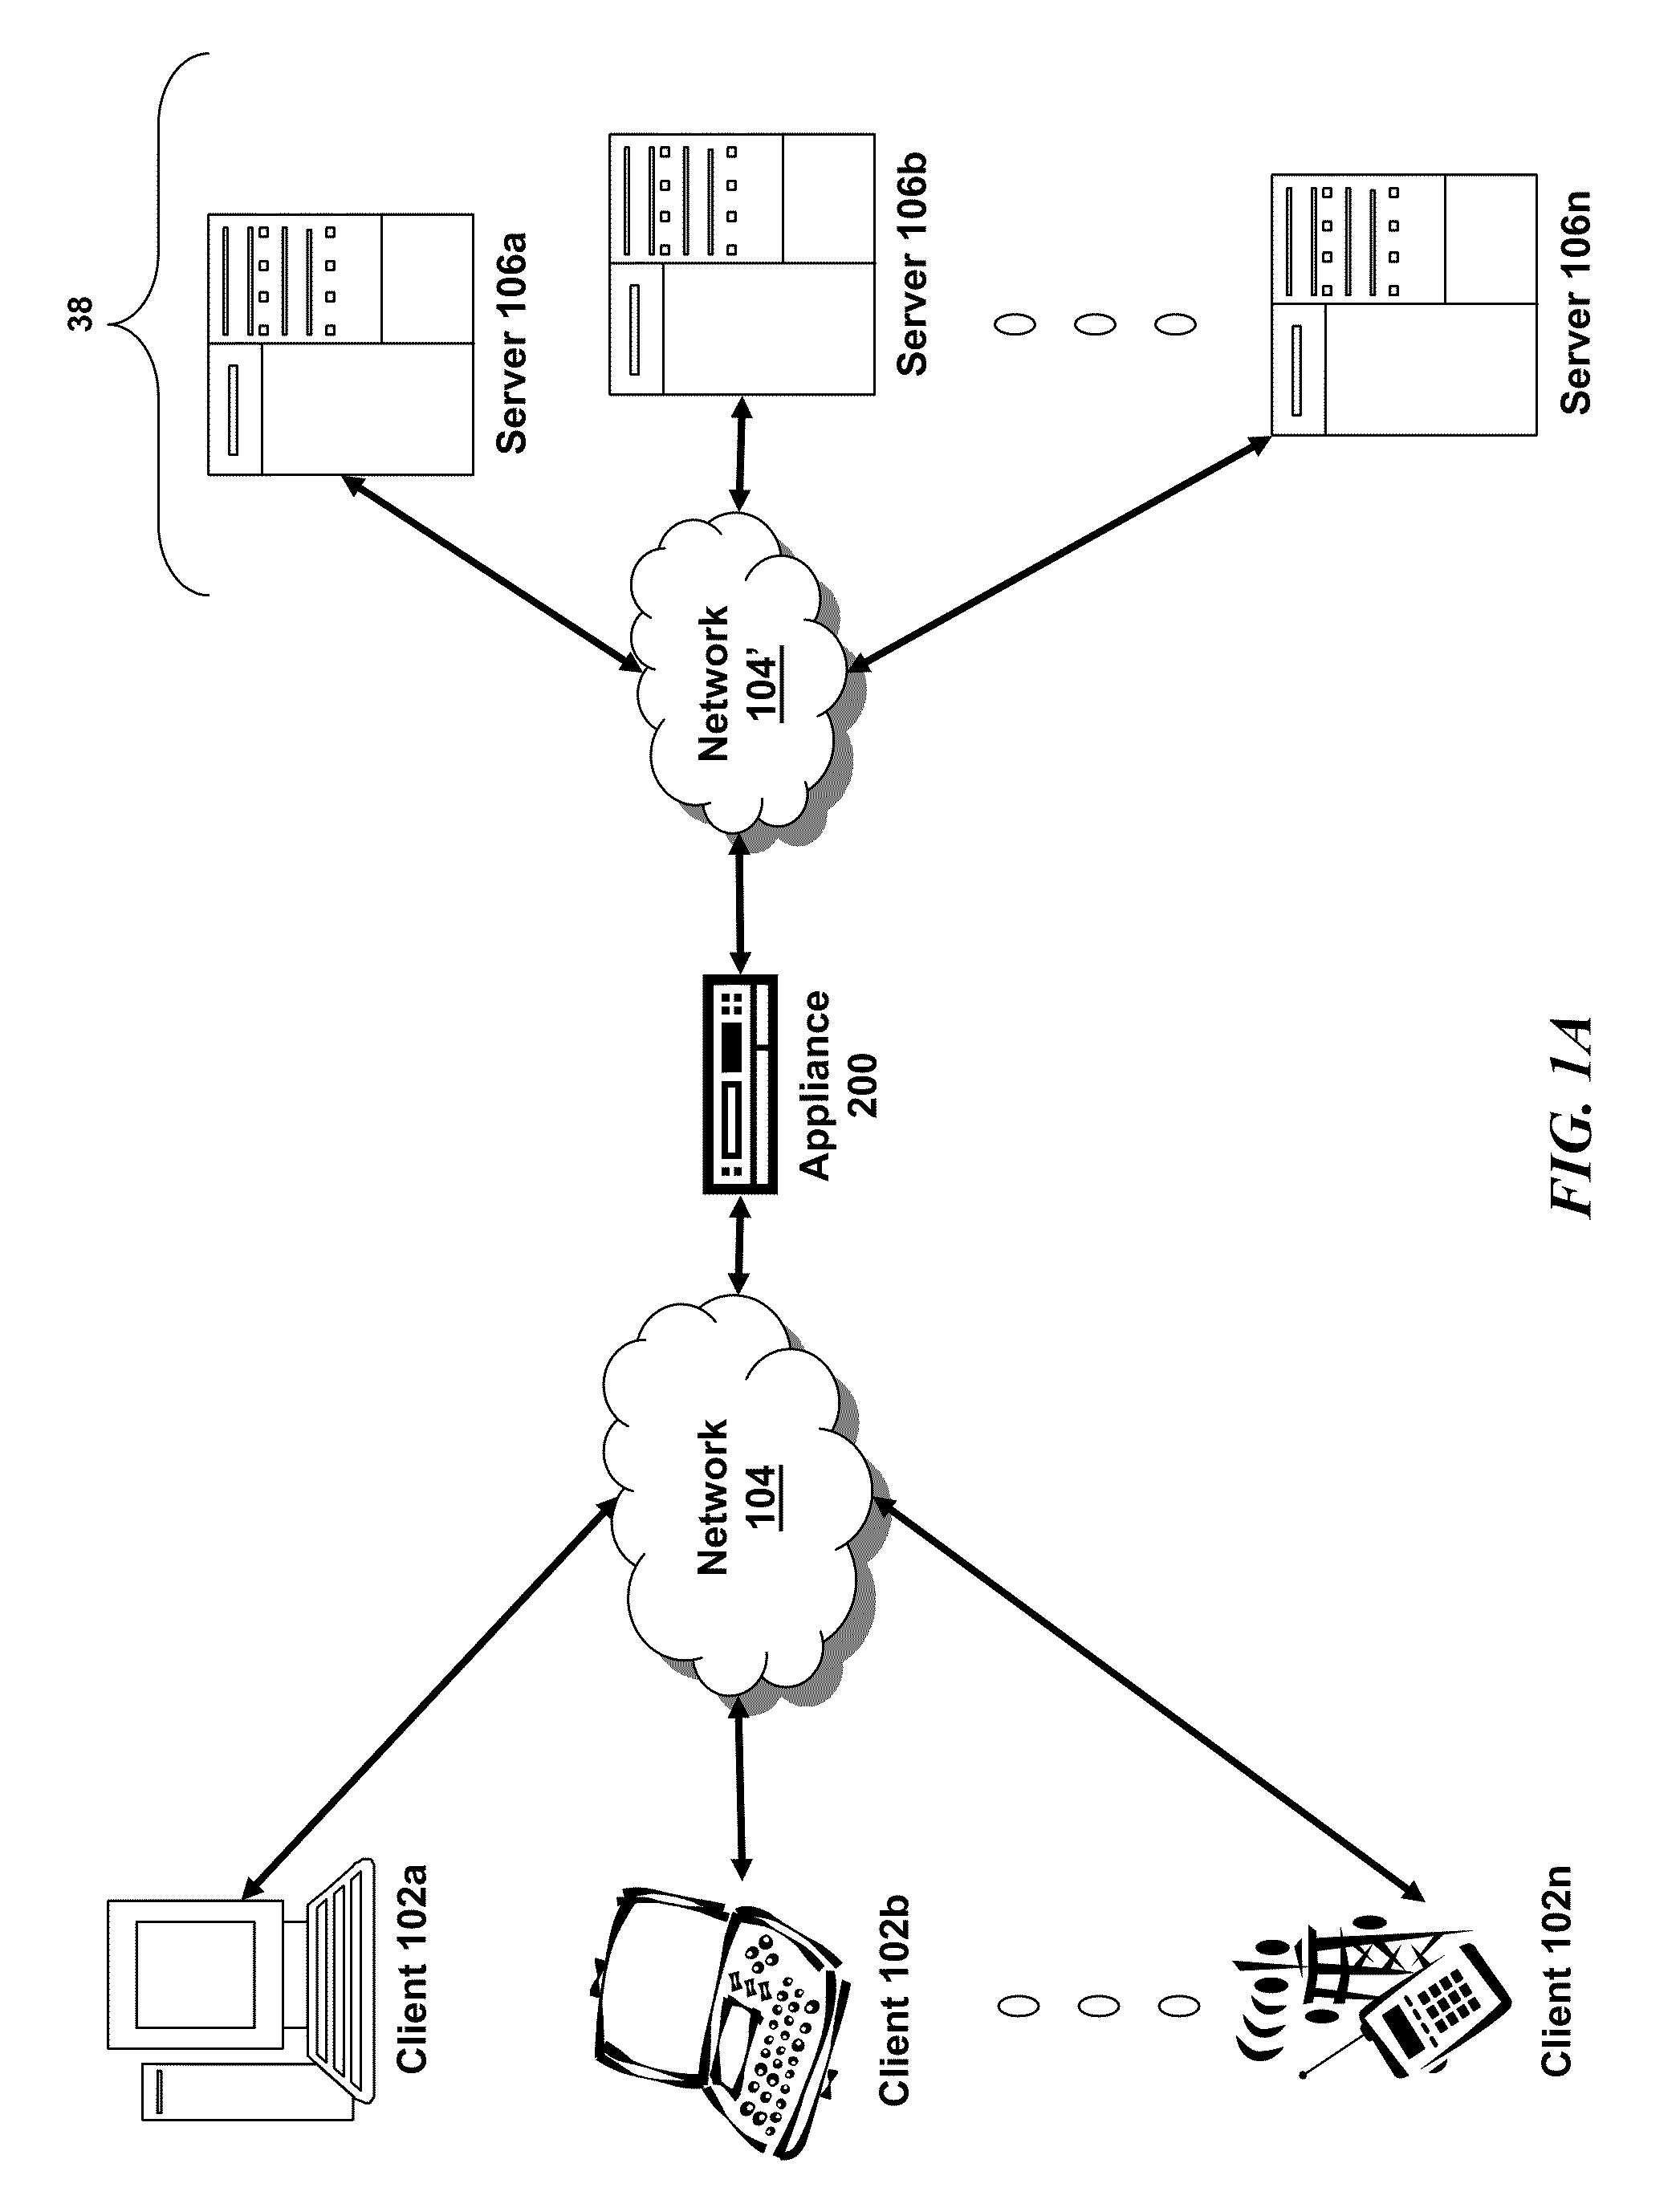 Systems and methods for database notification interface to efficiently identify events and changed data